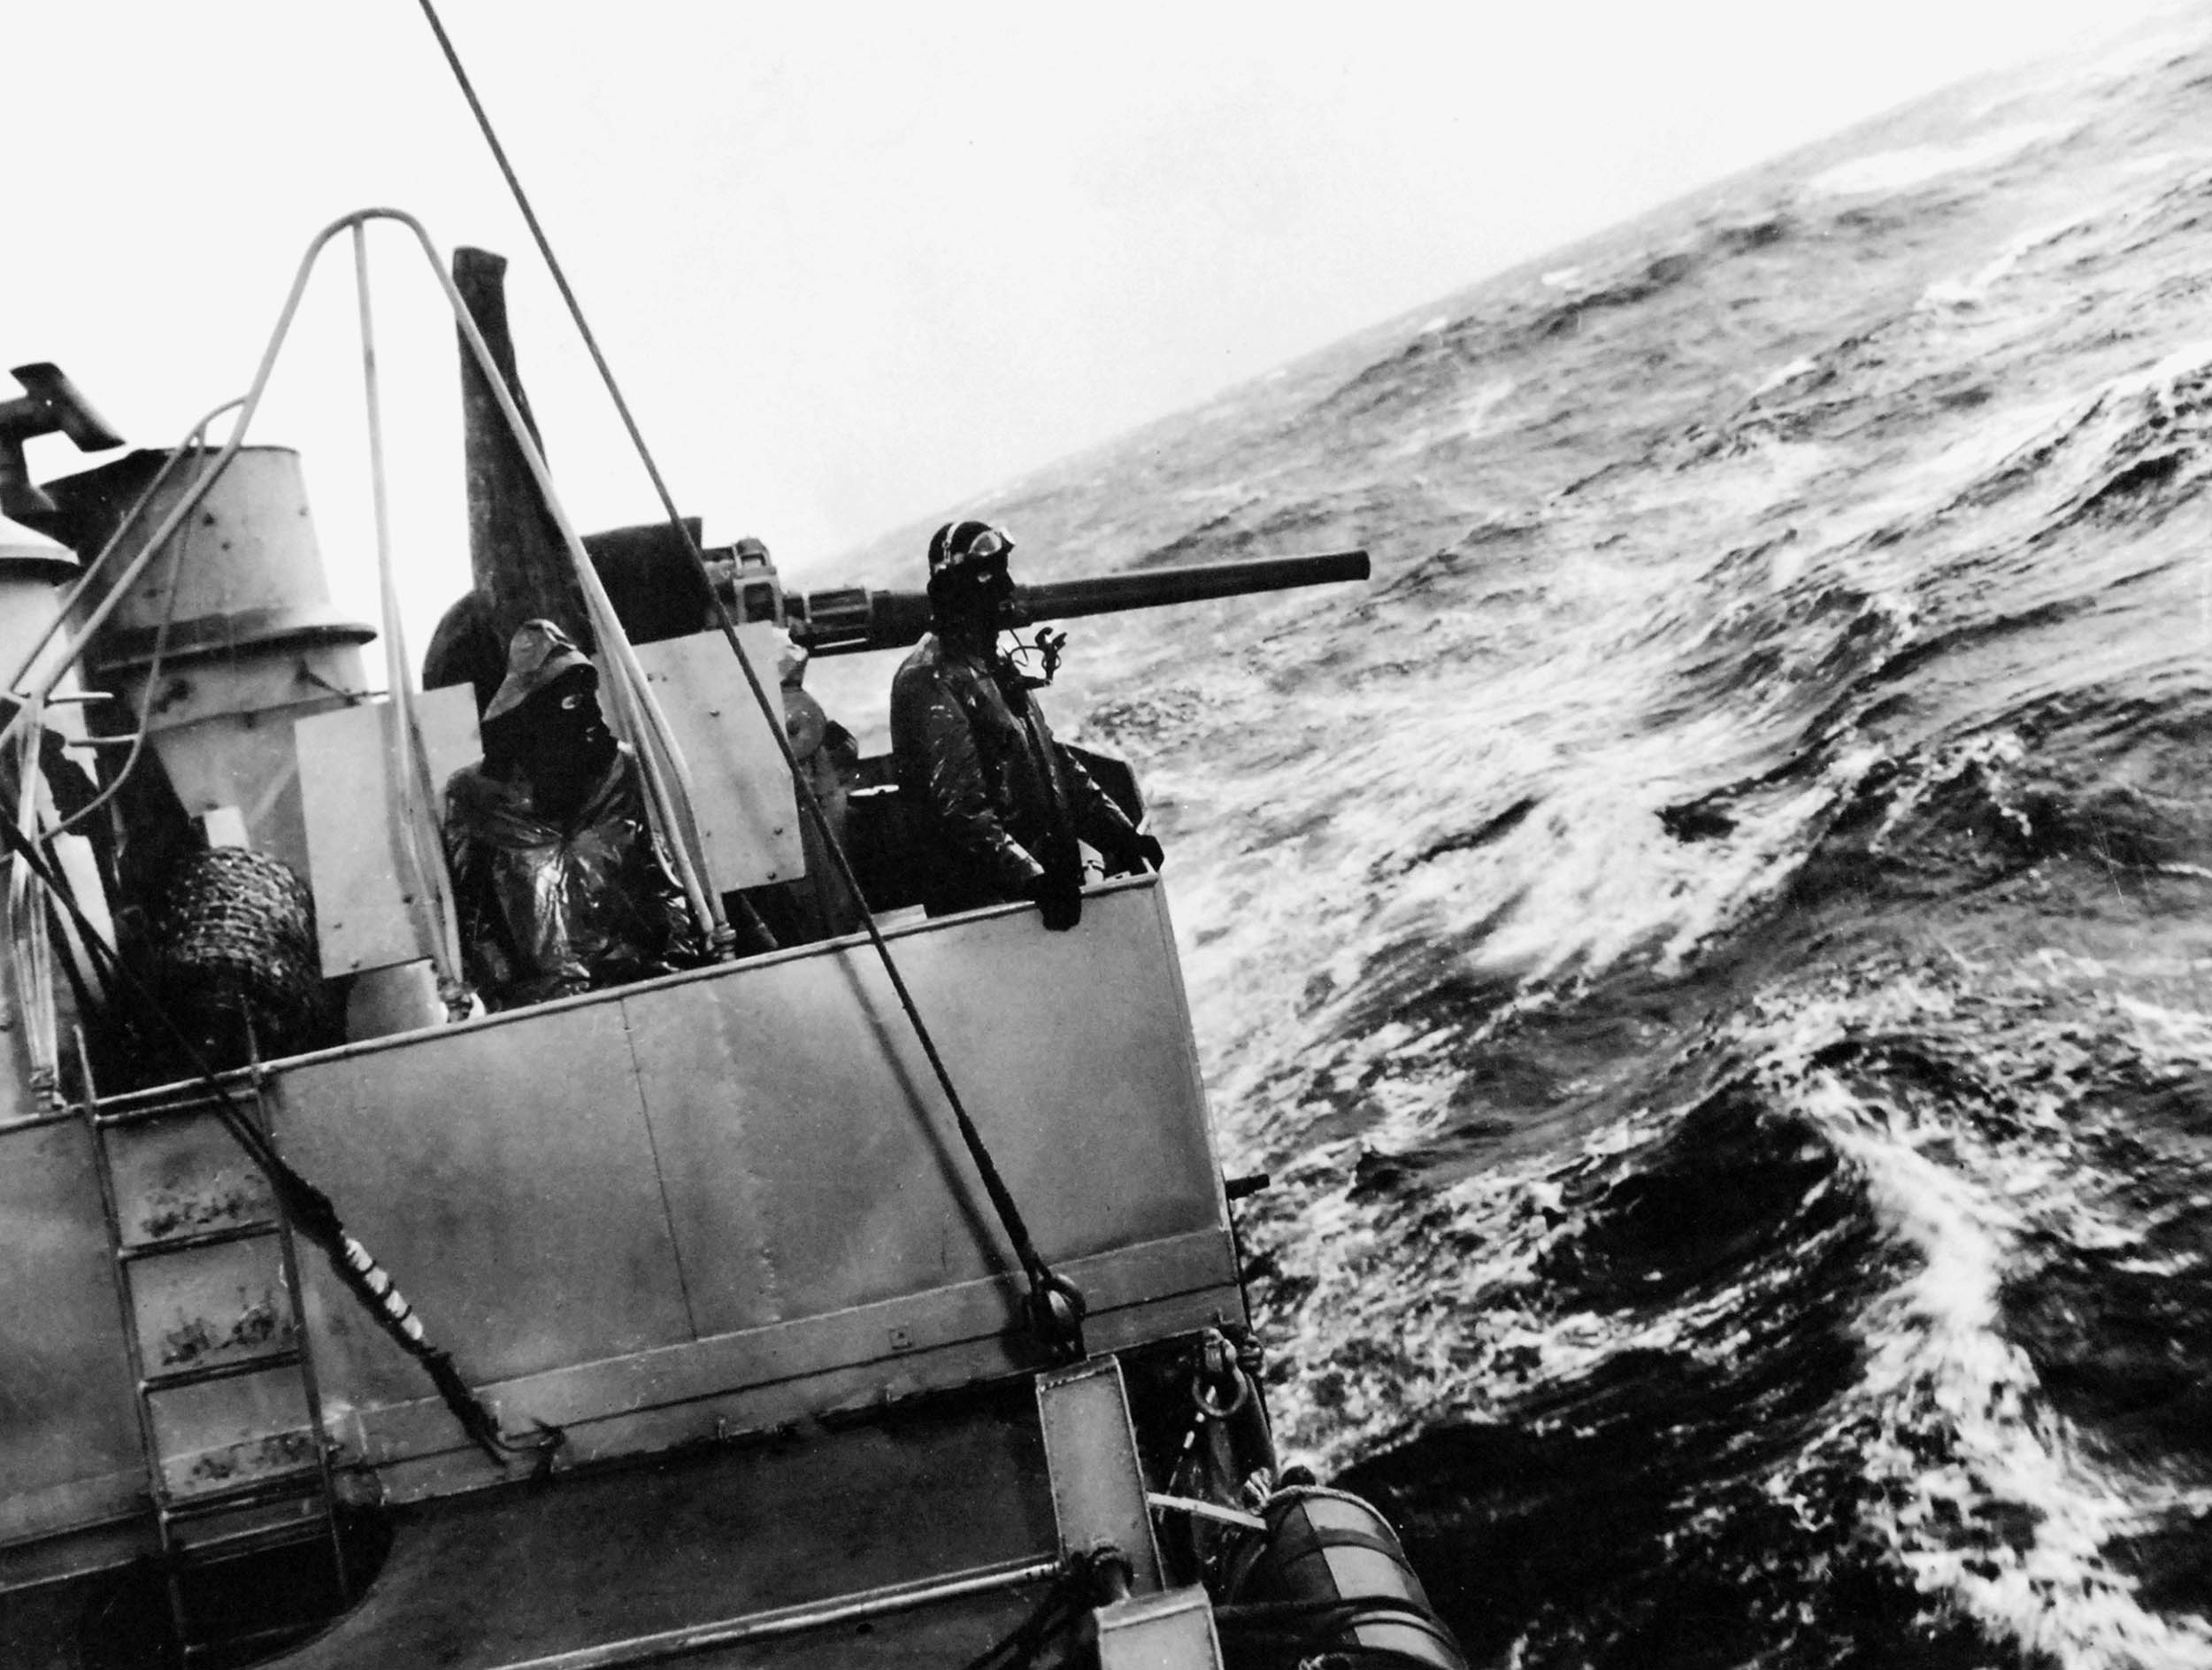 Lookouts stand watch on Navy destroyer’s deck house during convoy duty in Atlantic Ocean, June 1943 (U.S. Navy/National Archives and
Records Administration)